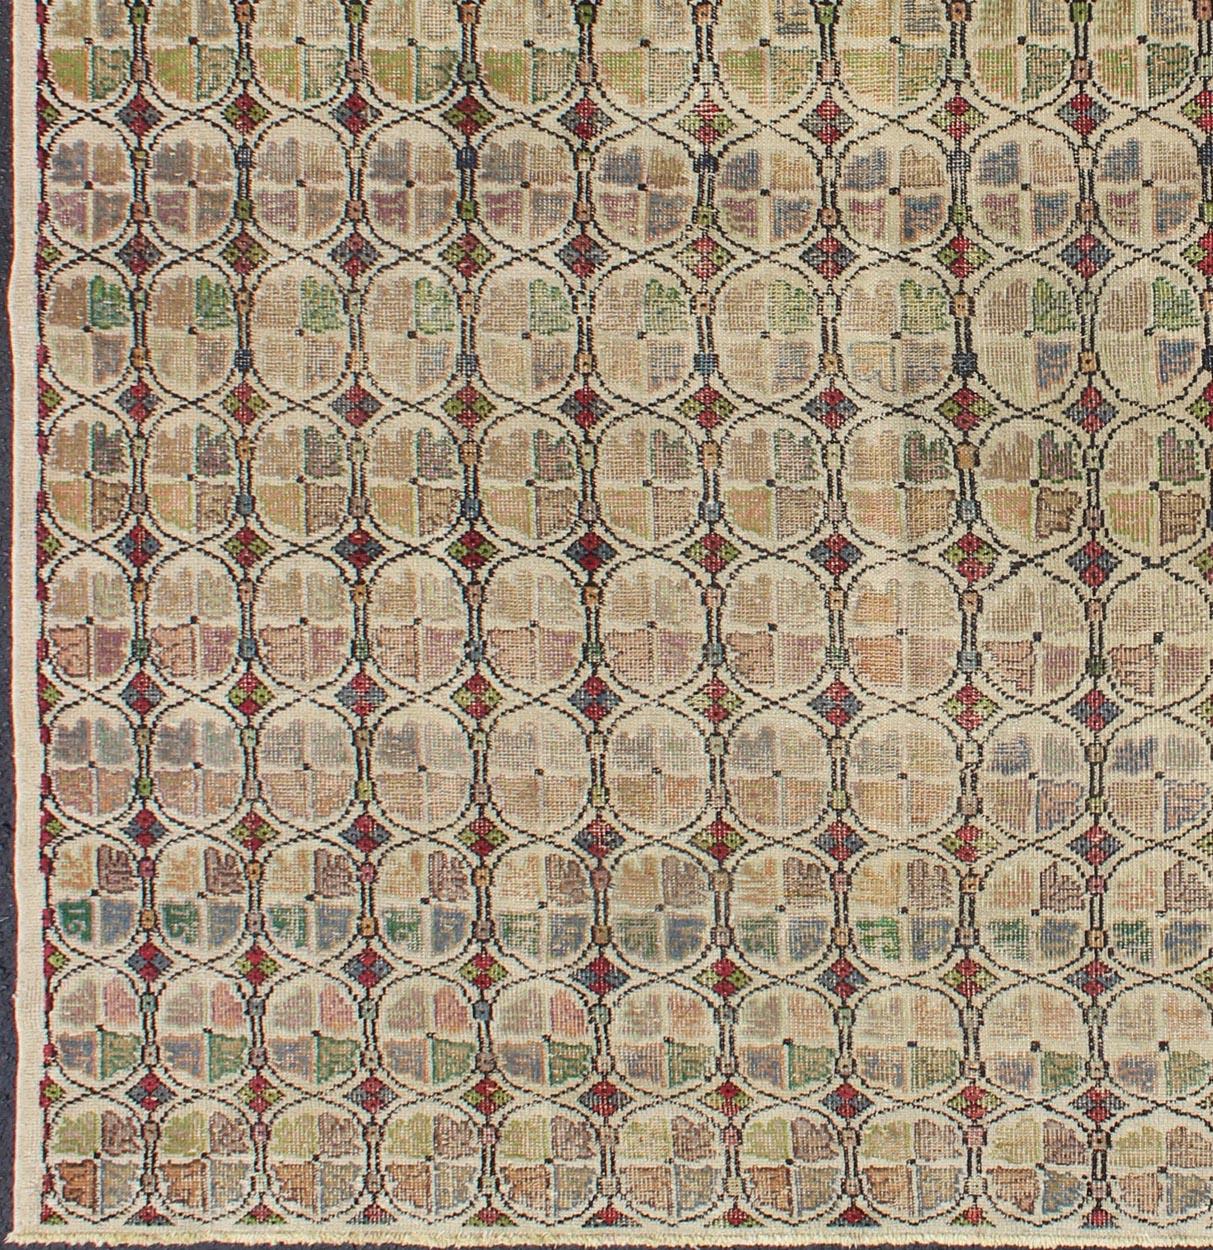 Squared Size Mid-Century Modern Rug with Circular Pattern in Variety of Colors.
Rendered on a muted background with a spotted and speckled assortment of yellows, reds, browns, greens and blues, this very unique Mid-Century square rug displays a